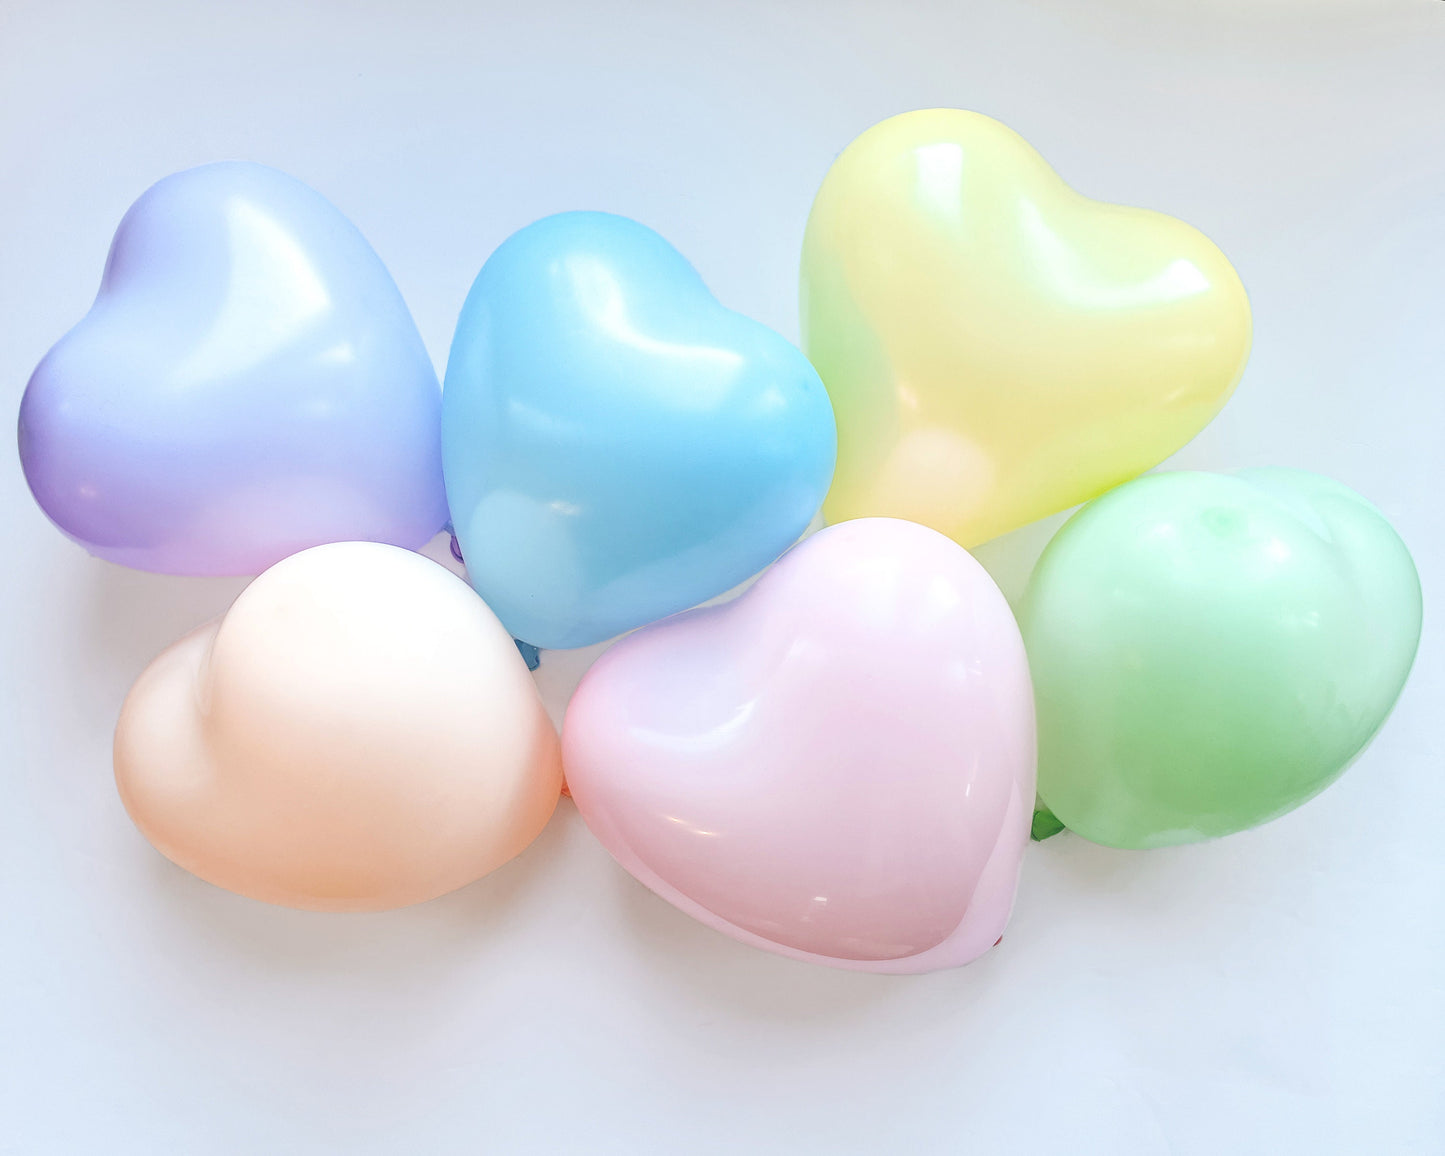 Pastel Heart Shaped Balloons 6 Pack || Conversation Heart Latex Balloons || Valentine's Day Balloons || Valentine's Day Decor || VD03